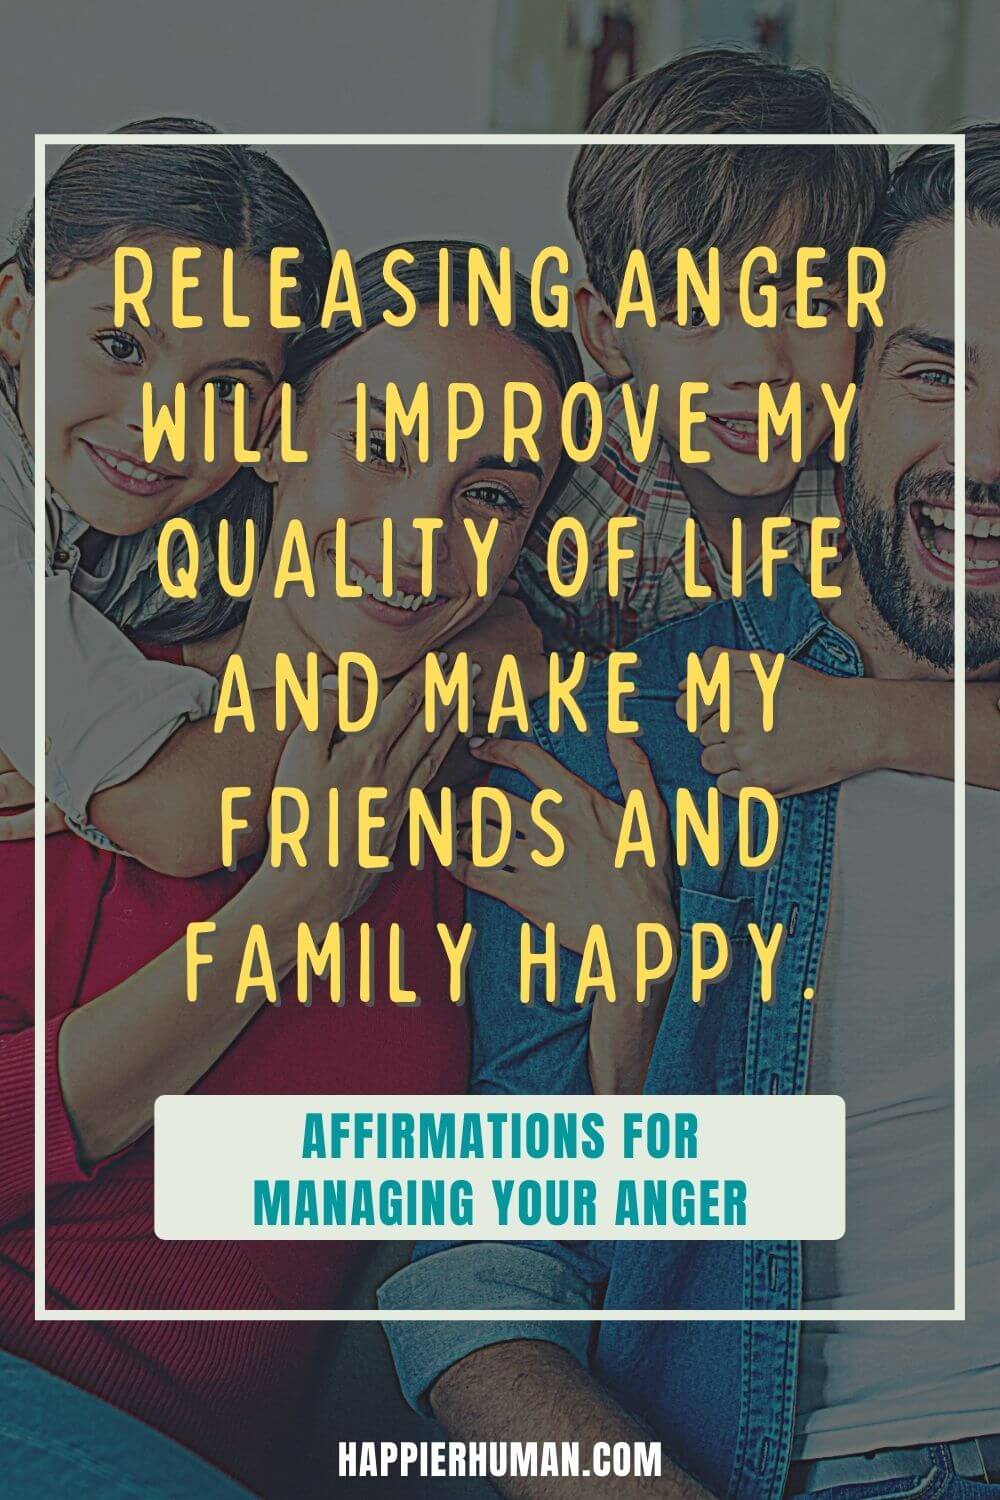 Affirmations for Anger - Releasing anger will improve my quality of life and make my friends and family happy. | affirmations to control anger | affirmations to release anger | positive affirmations for anger